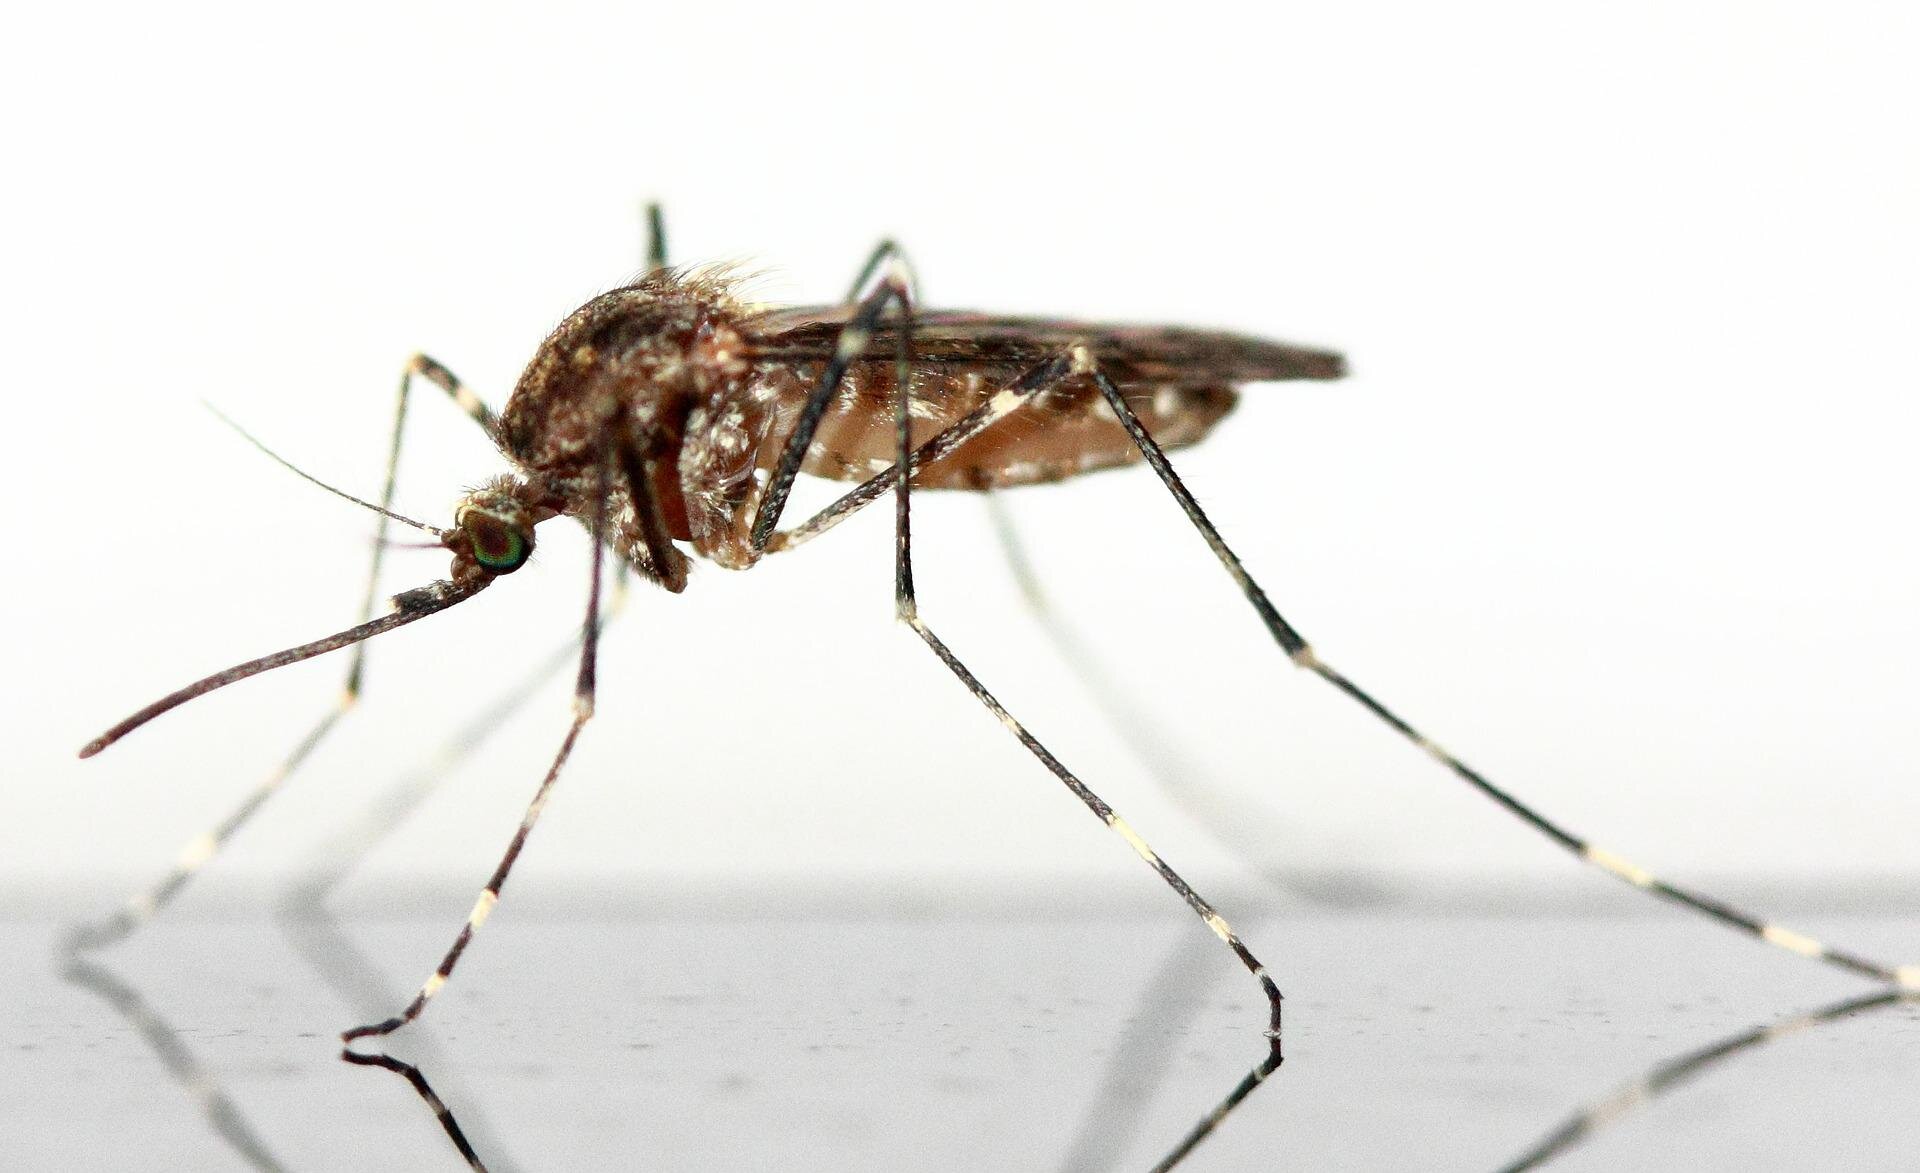 Biologist explains why there were so many mosquitoes this year